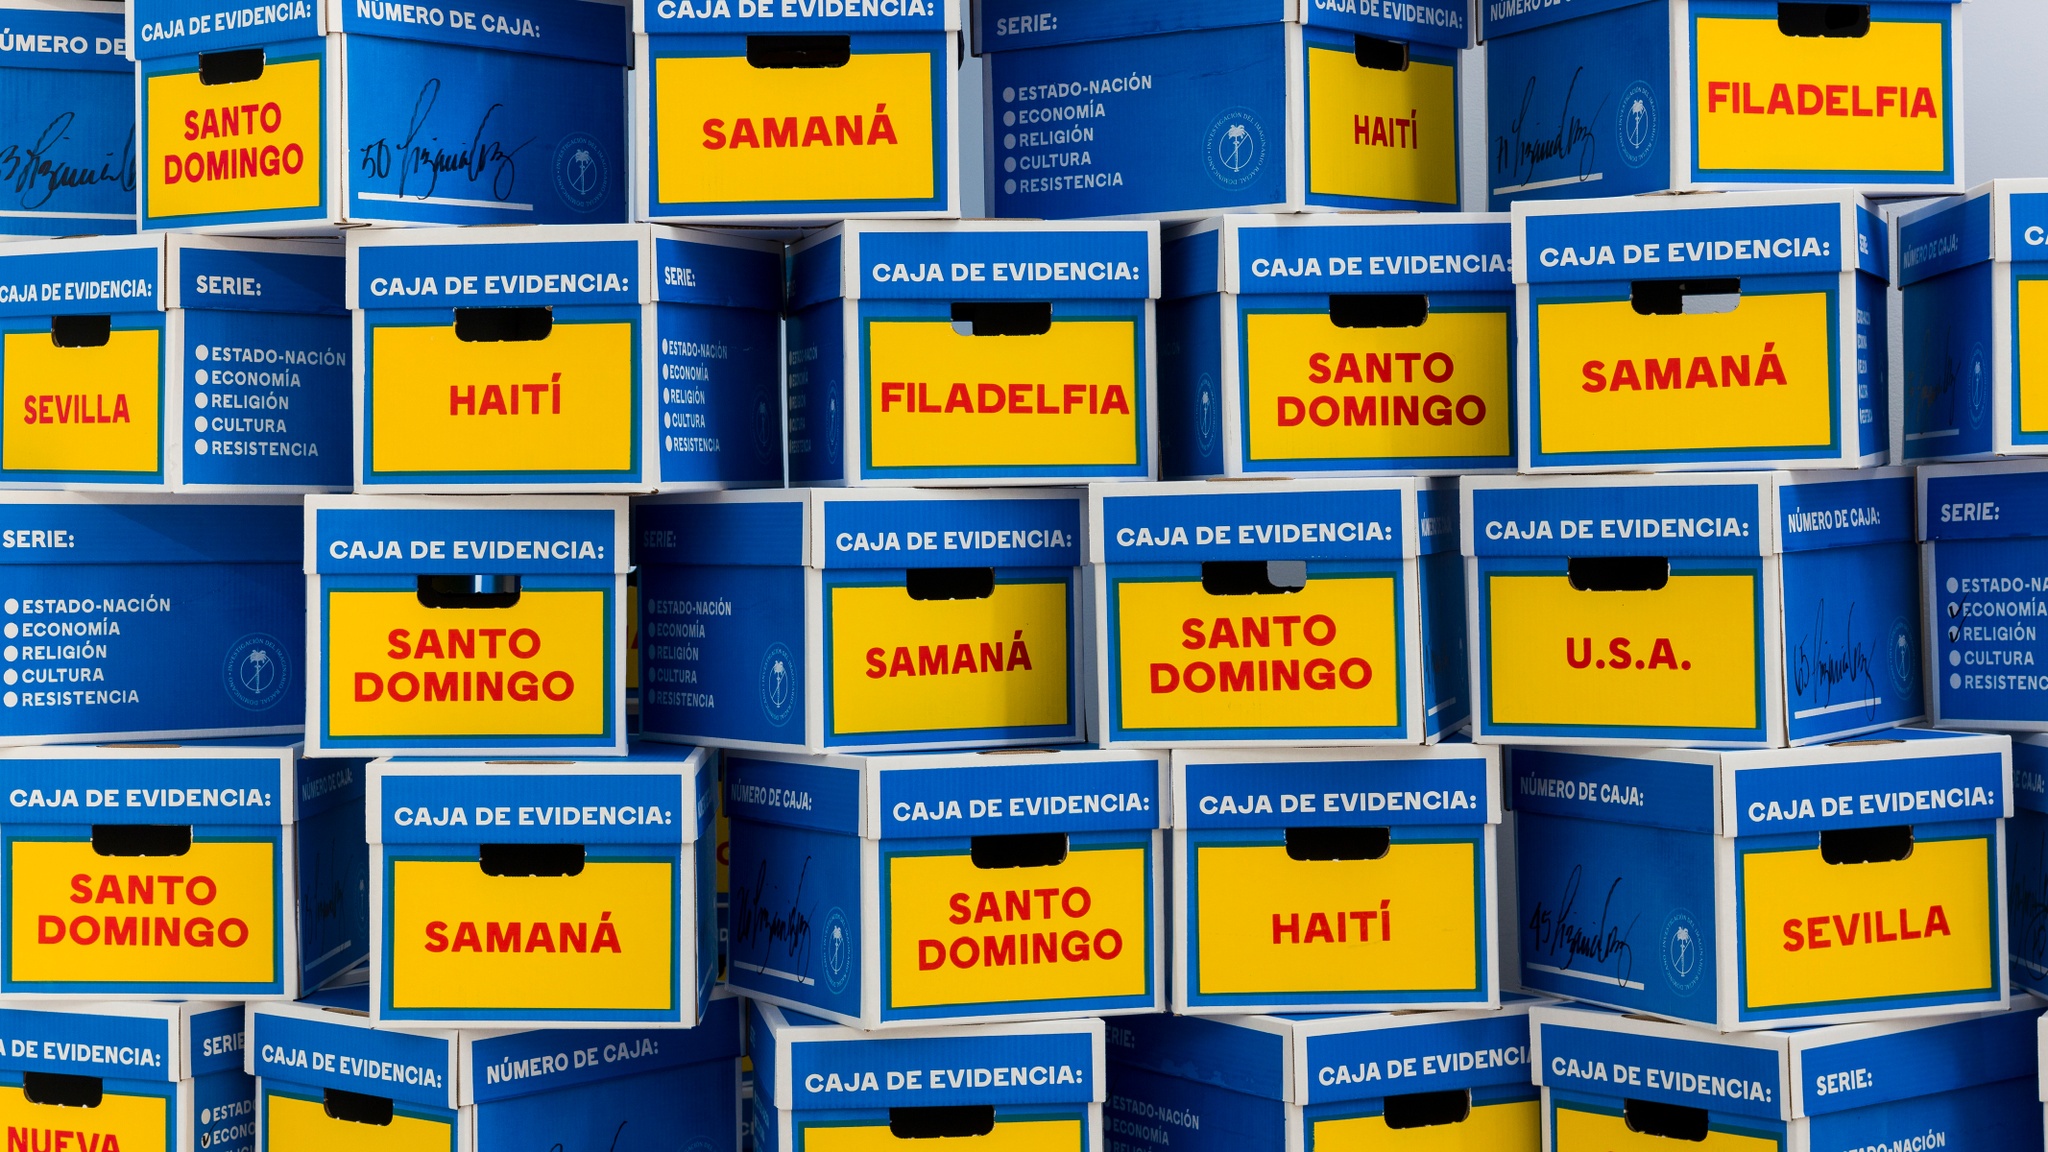 A stack of blue and yellow, cardboard evidence boxes, labeled in Spanish “Caja de evidencia.” The boxes are arranged in staggered columns and rows to create a wall of boxes. Each box is labeled with the name of a location in Spanish in red text, including Haití, Samana, Filadelfia, Santo Domingo, Nueva York, and Sevilla.